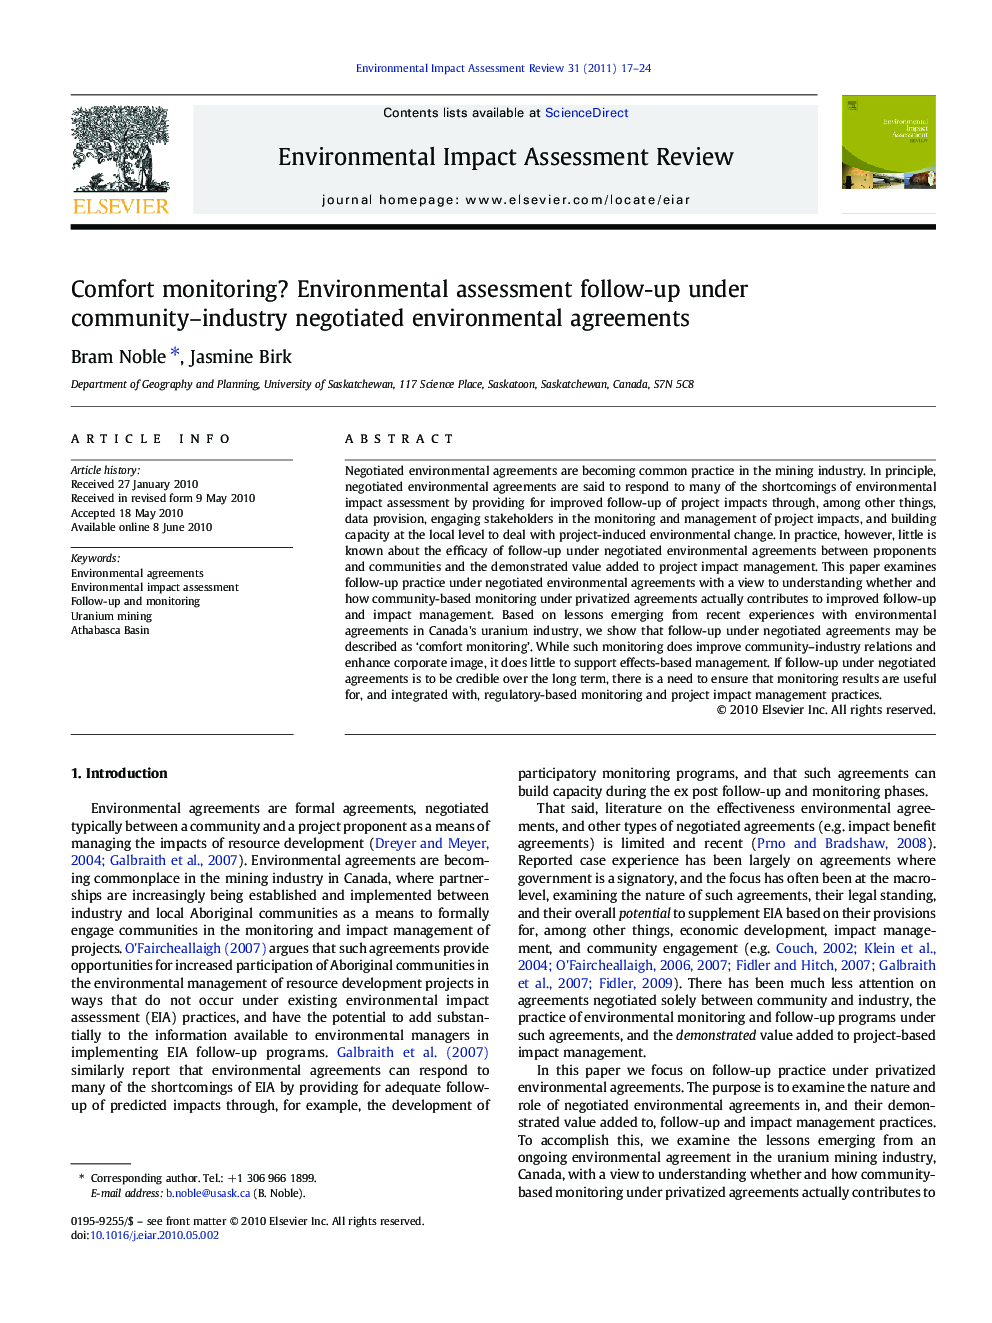 Comfort monitoring? Environmental assessment follow-up under community–industry negotiated environmental agreements